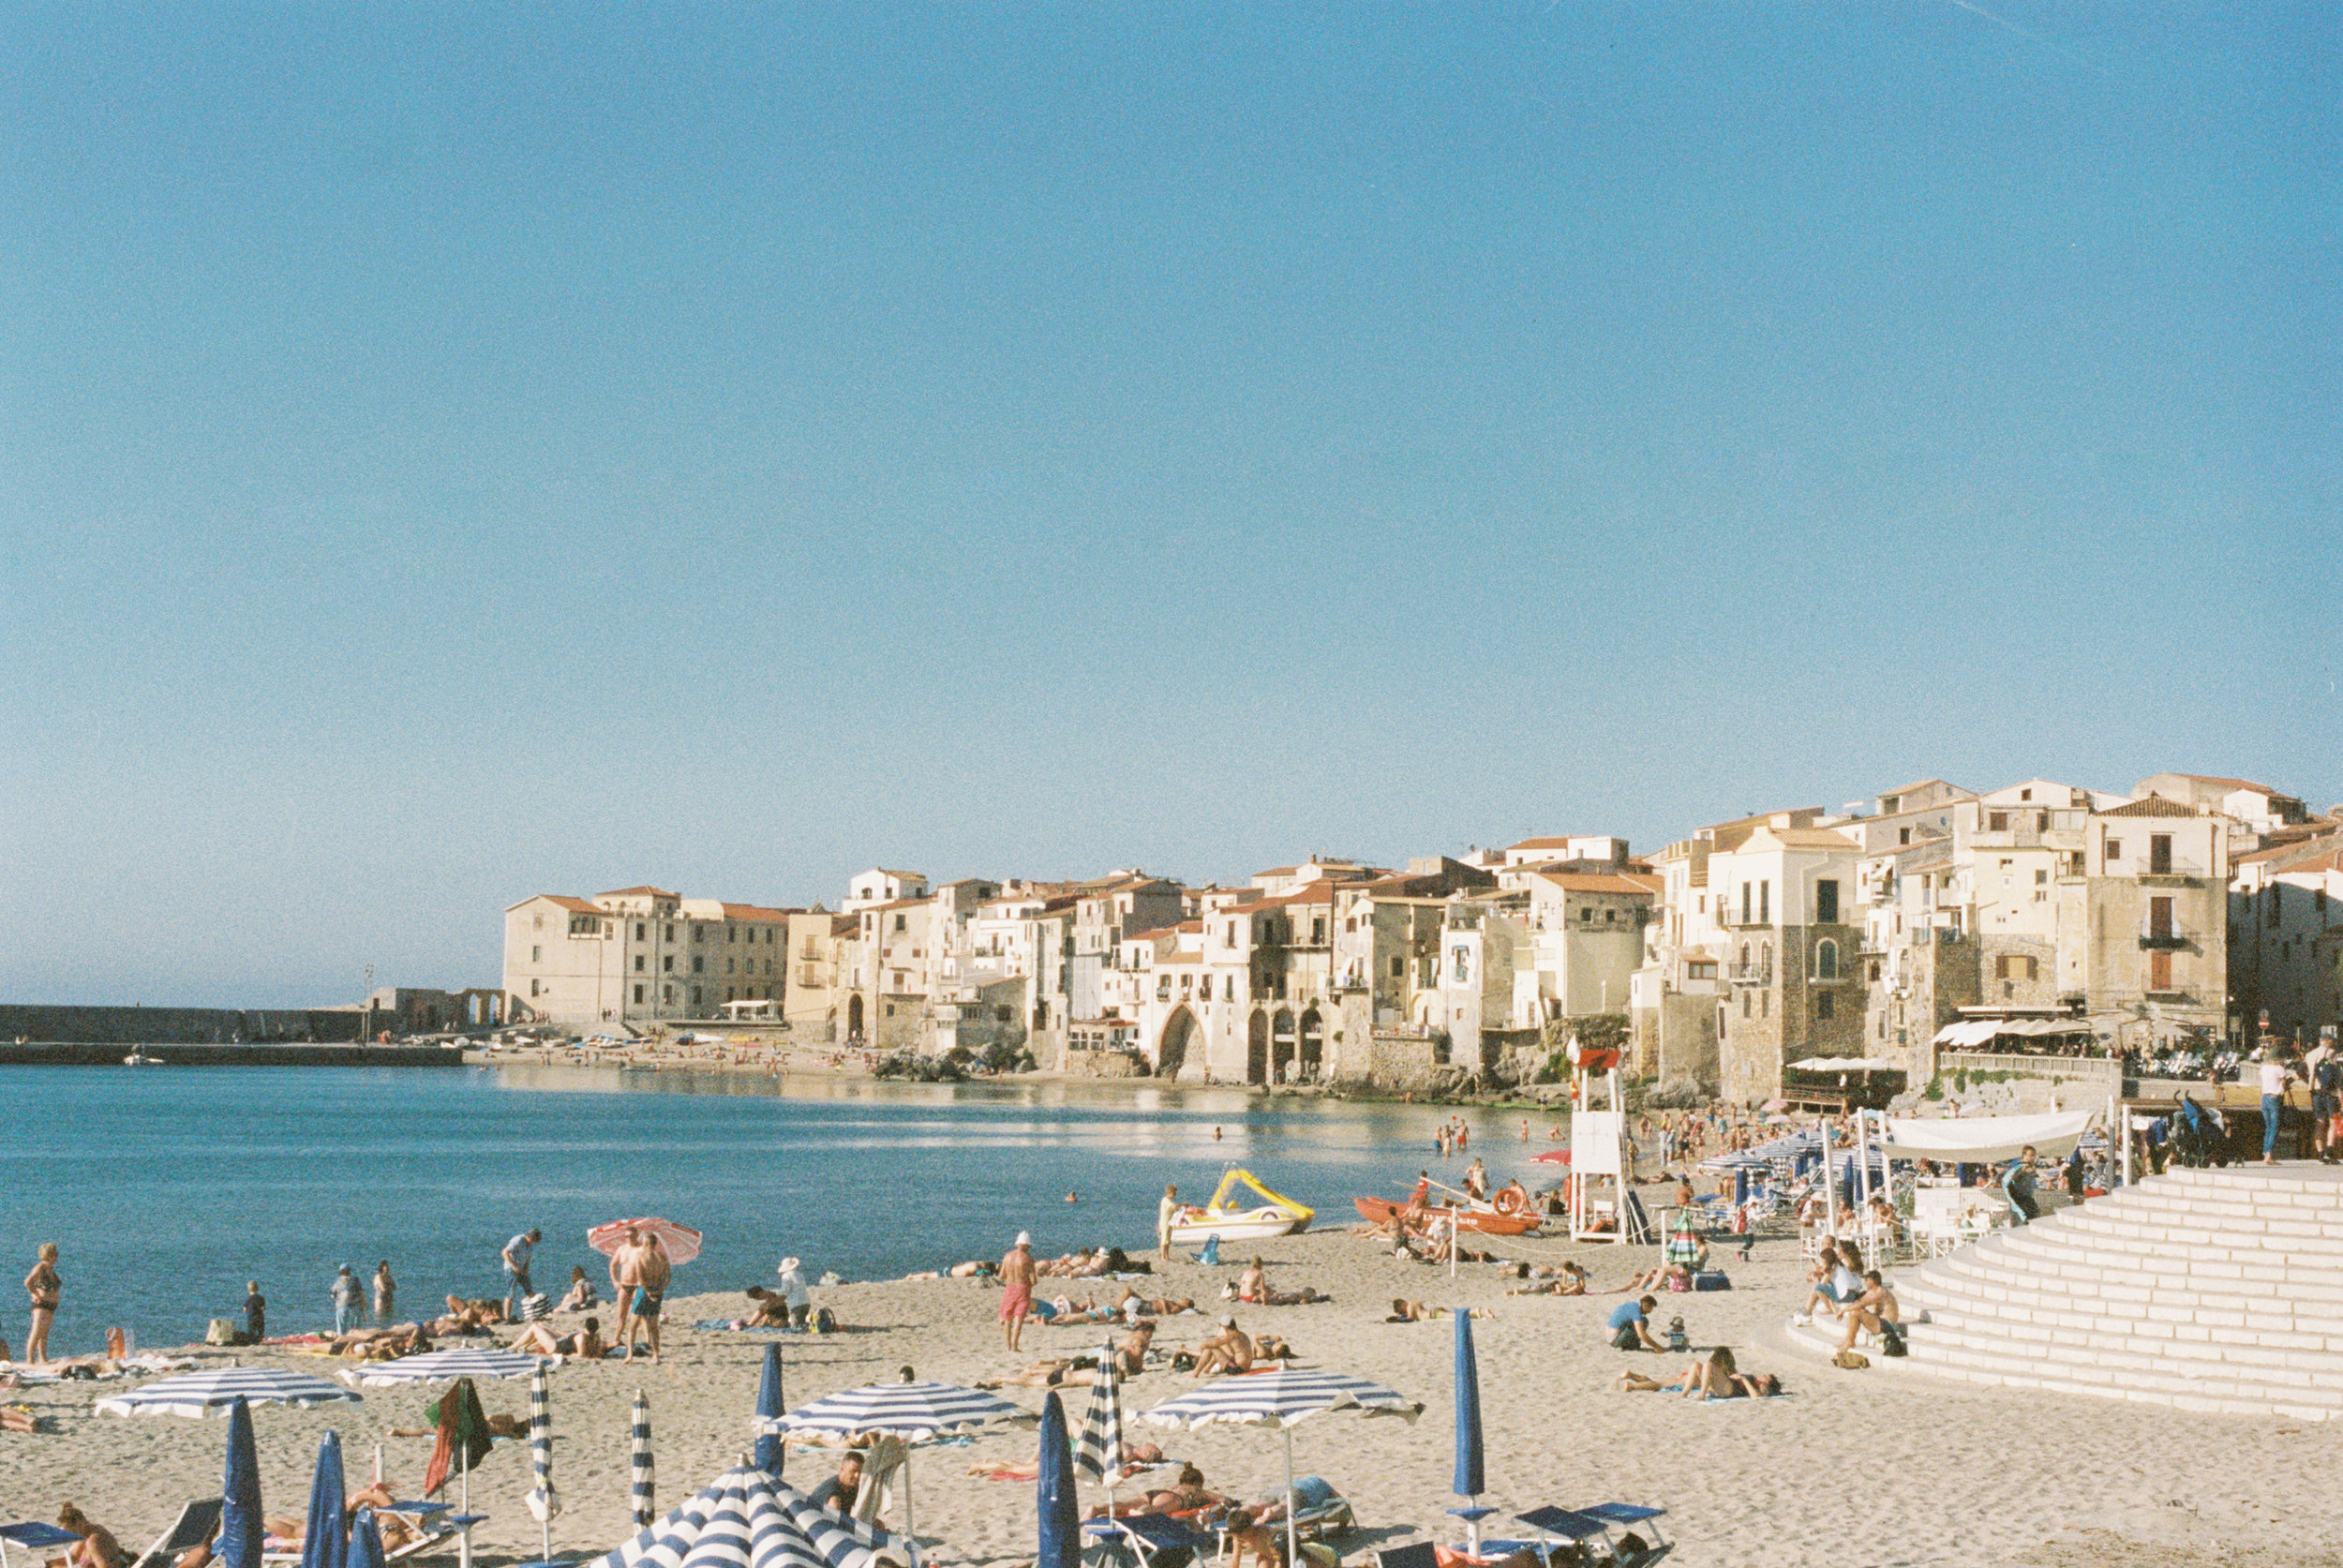 summer vacation by the sea in cefalu, sicily